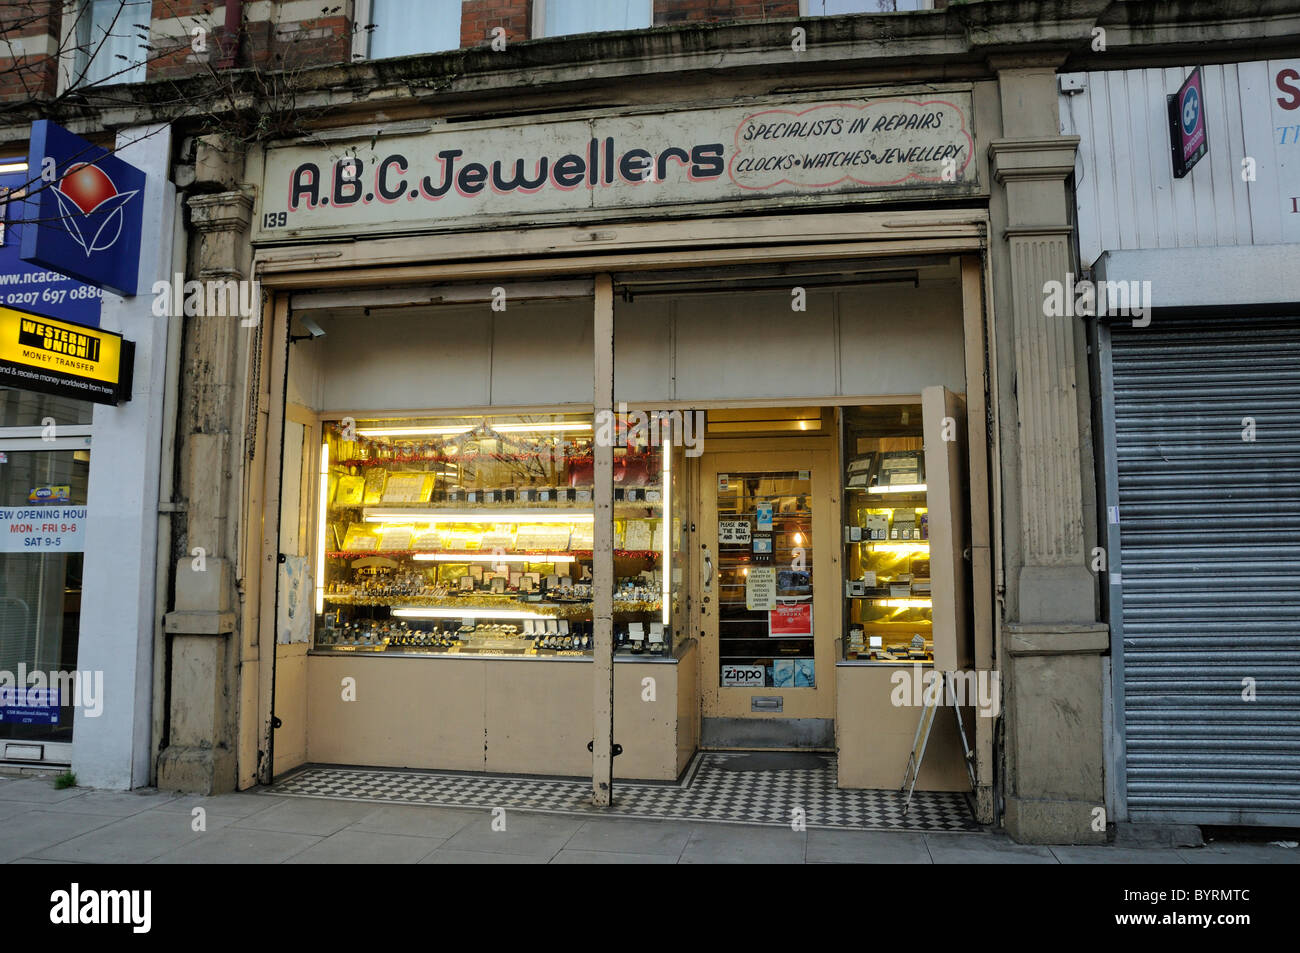 A.B.C. Jewellers old distressed shop front on Holloway Road Islington London England UK Stock Photo